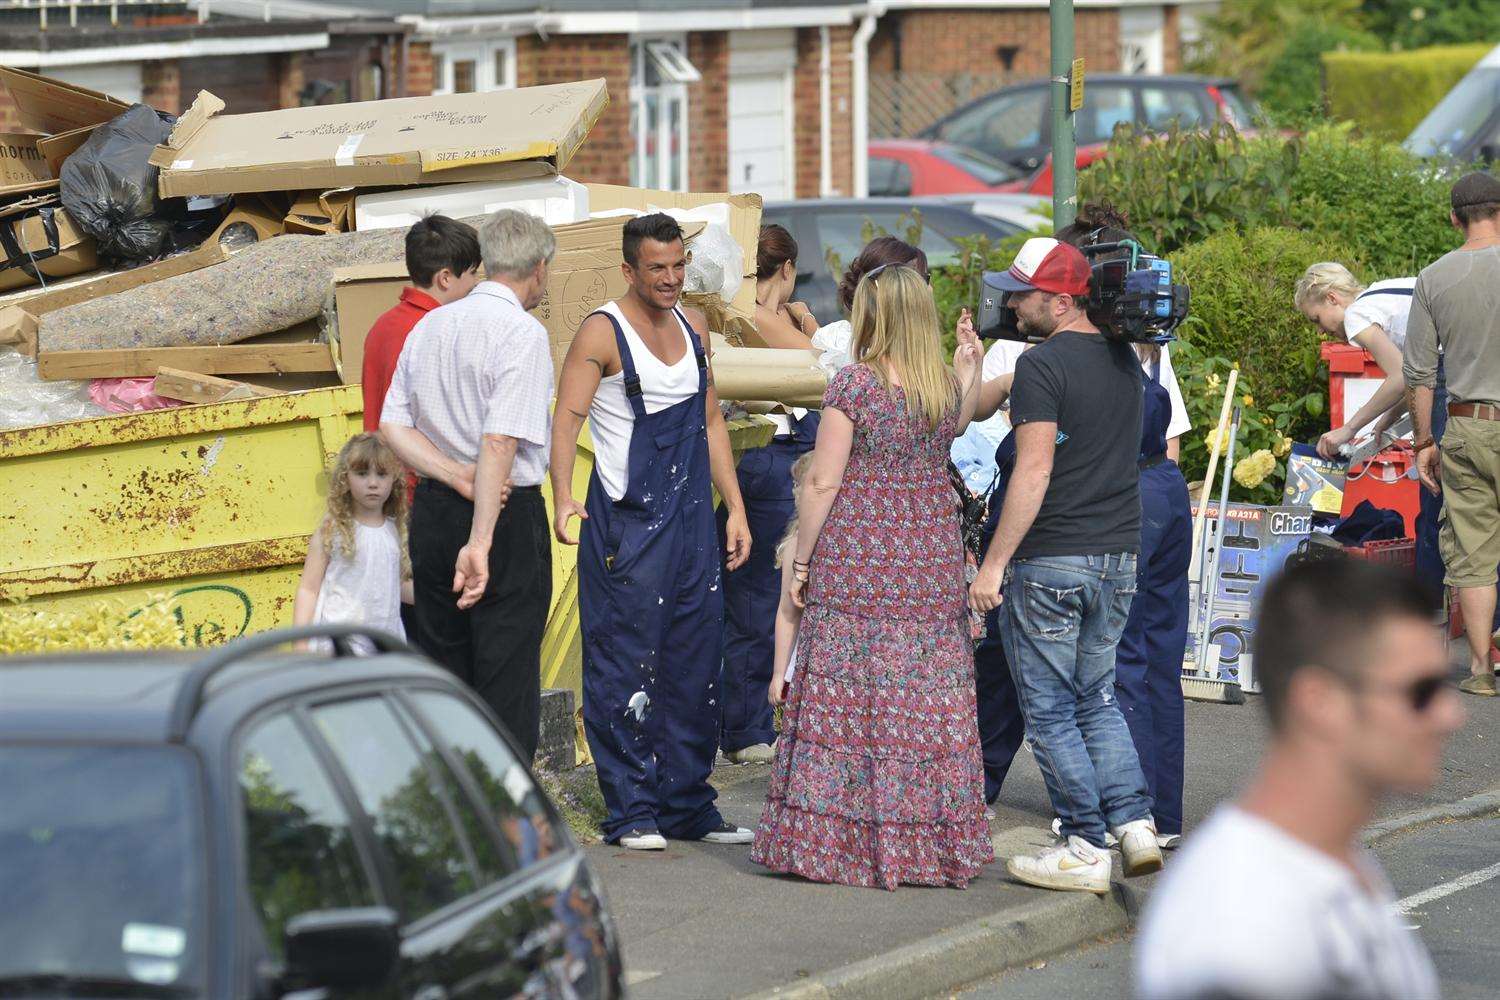 Peter Andre's 60 Minute Makeover visited a home in Allington, Maidstone earlier this year